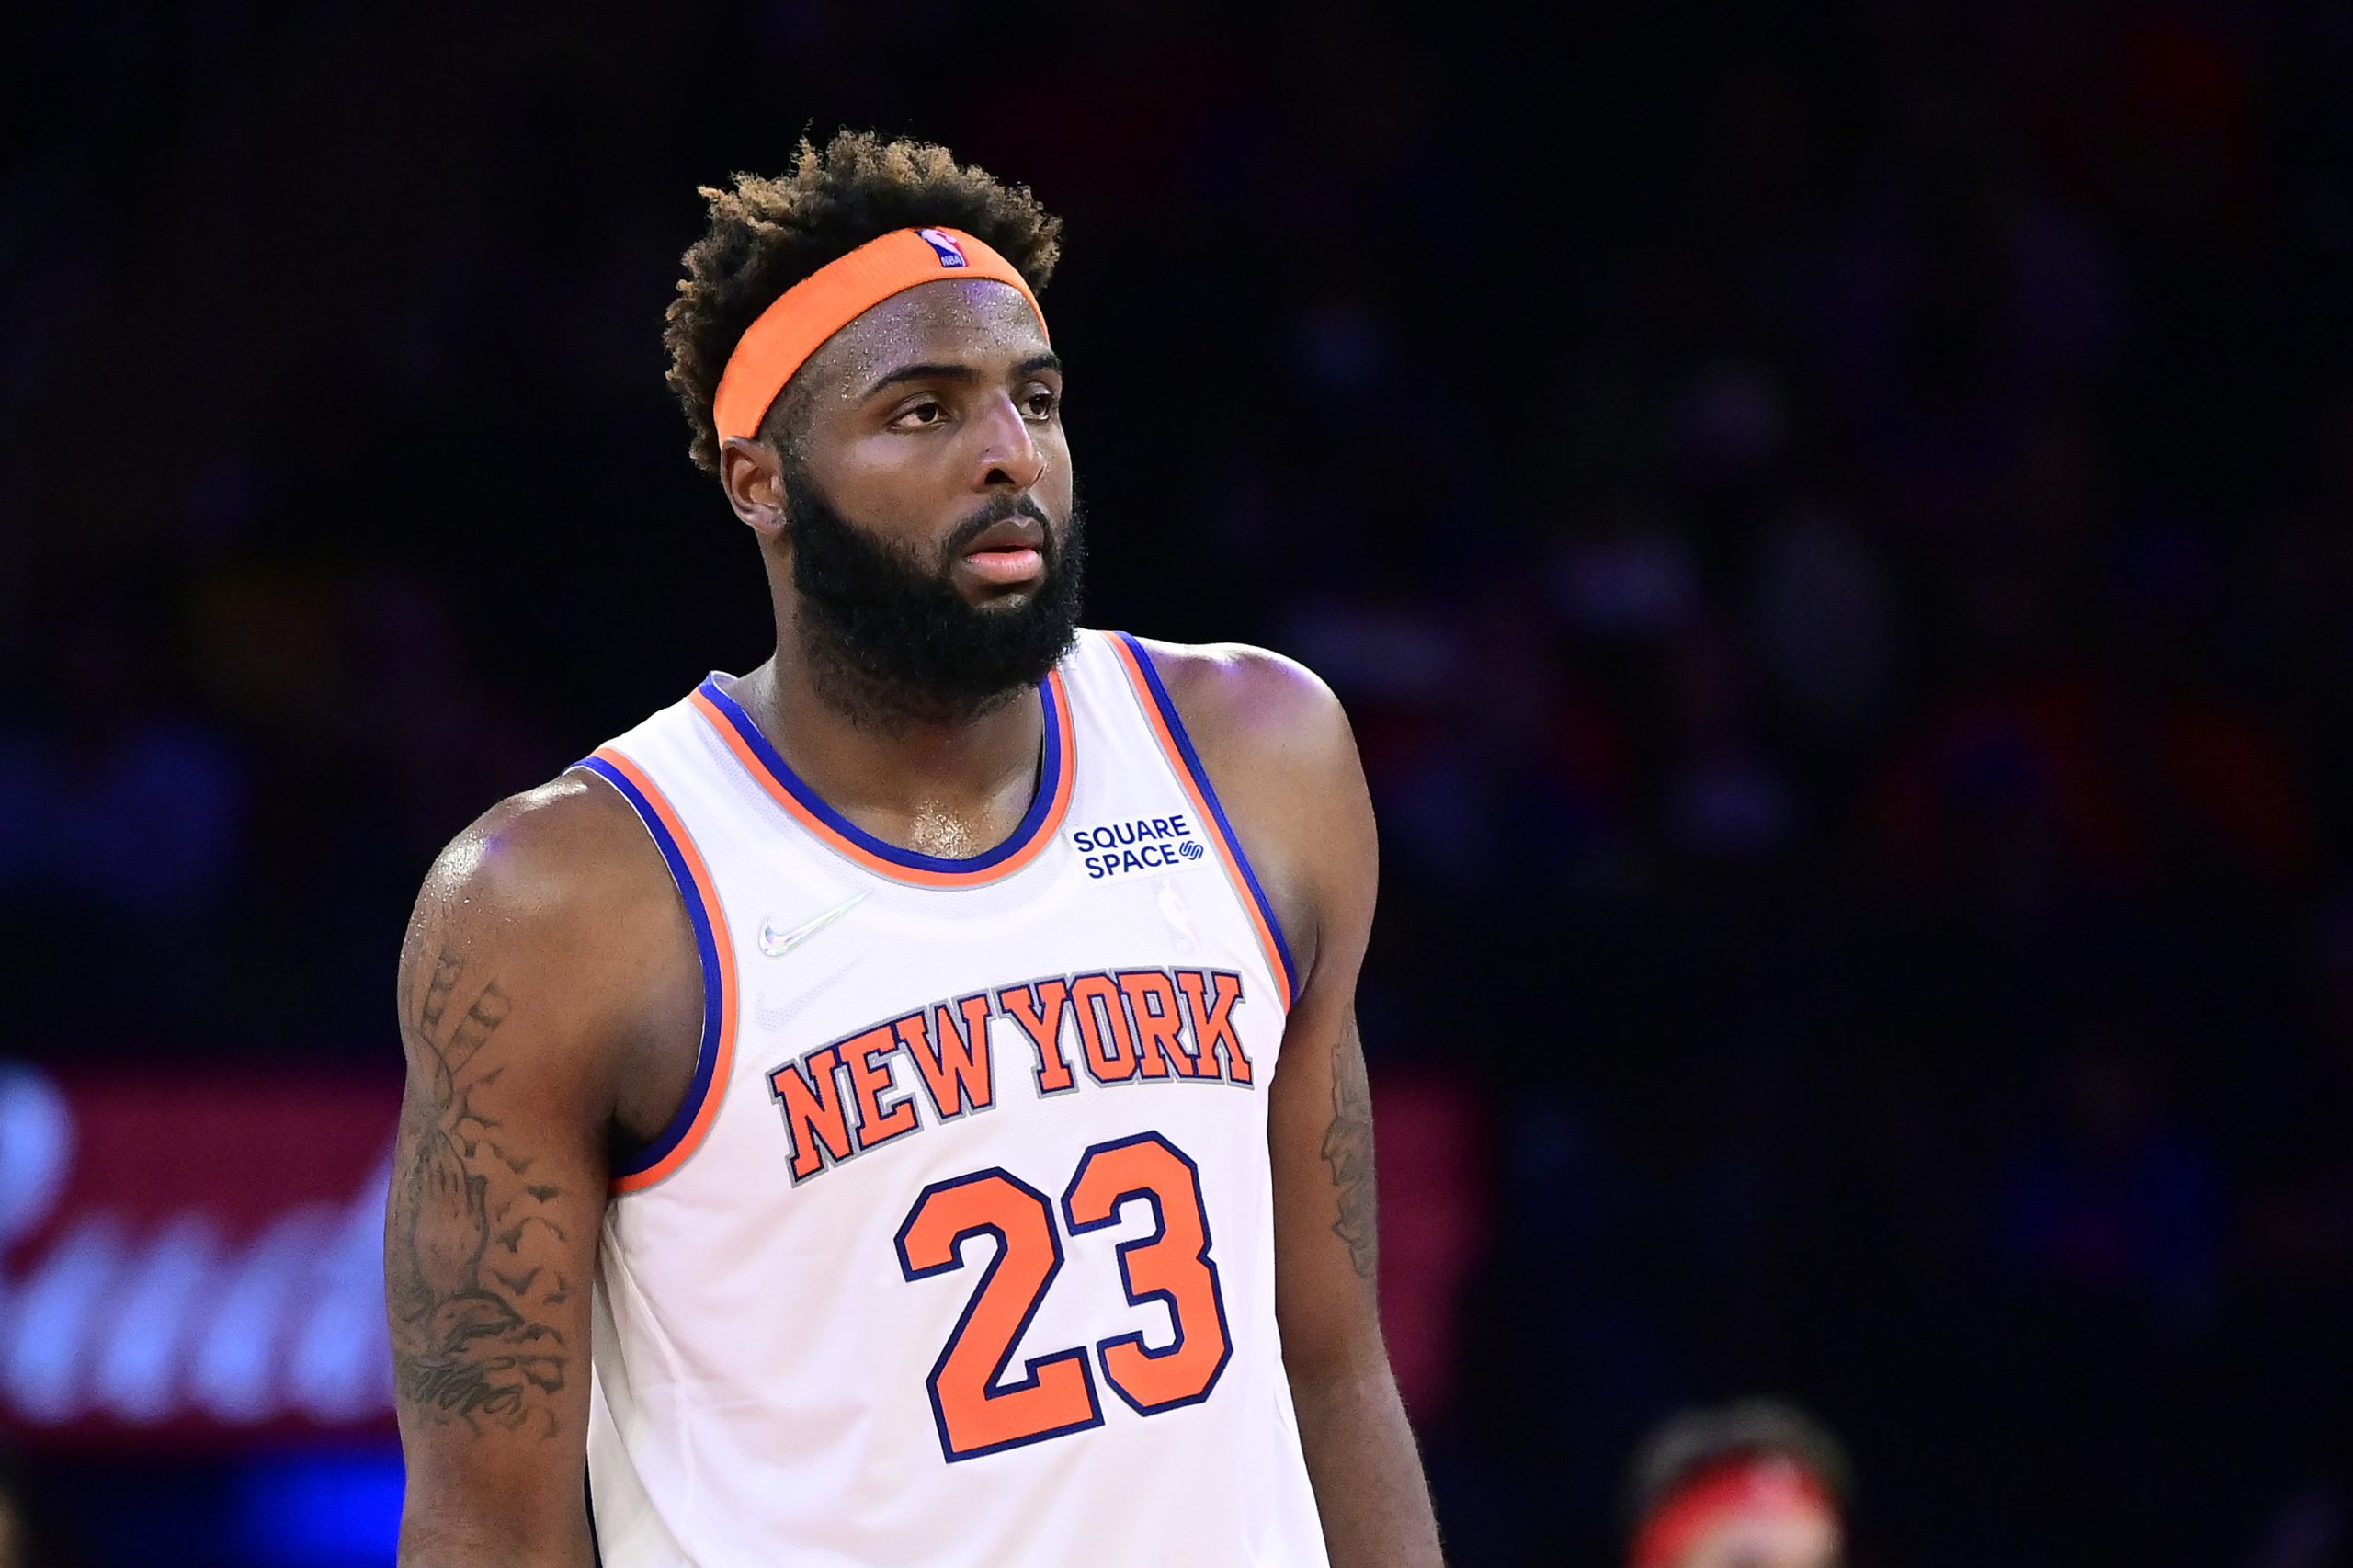 Mitchell Robinson New York Knicks Contract Extension Curse Charlie Ward draft busts